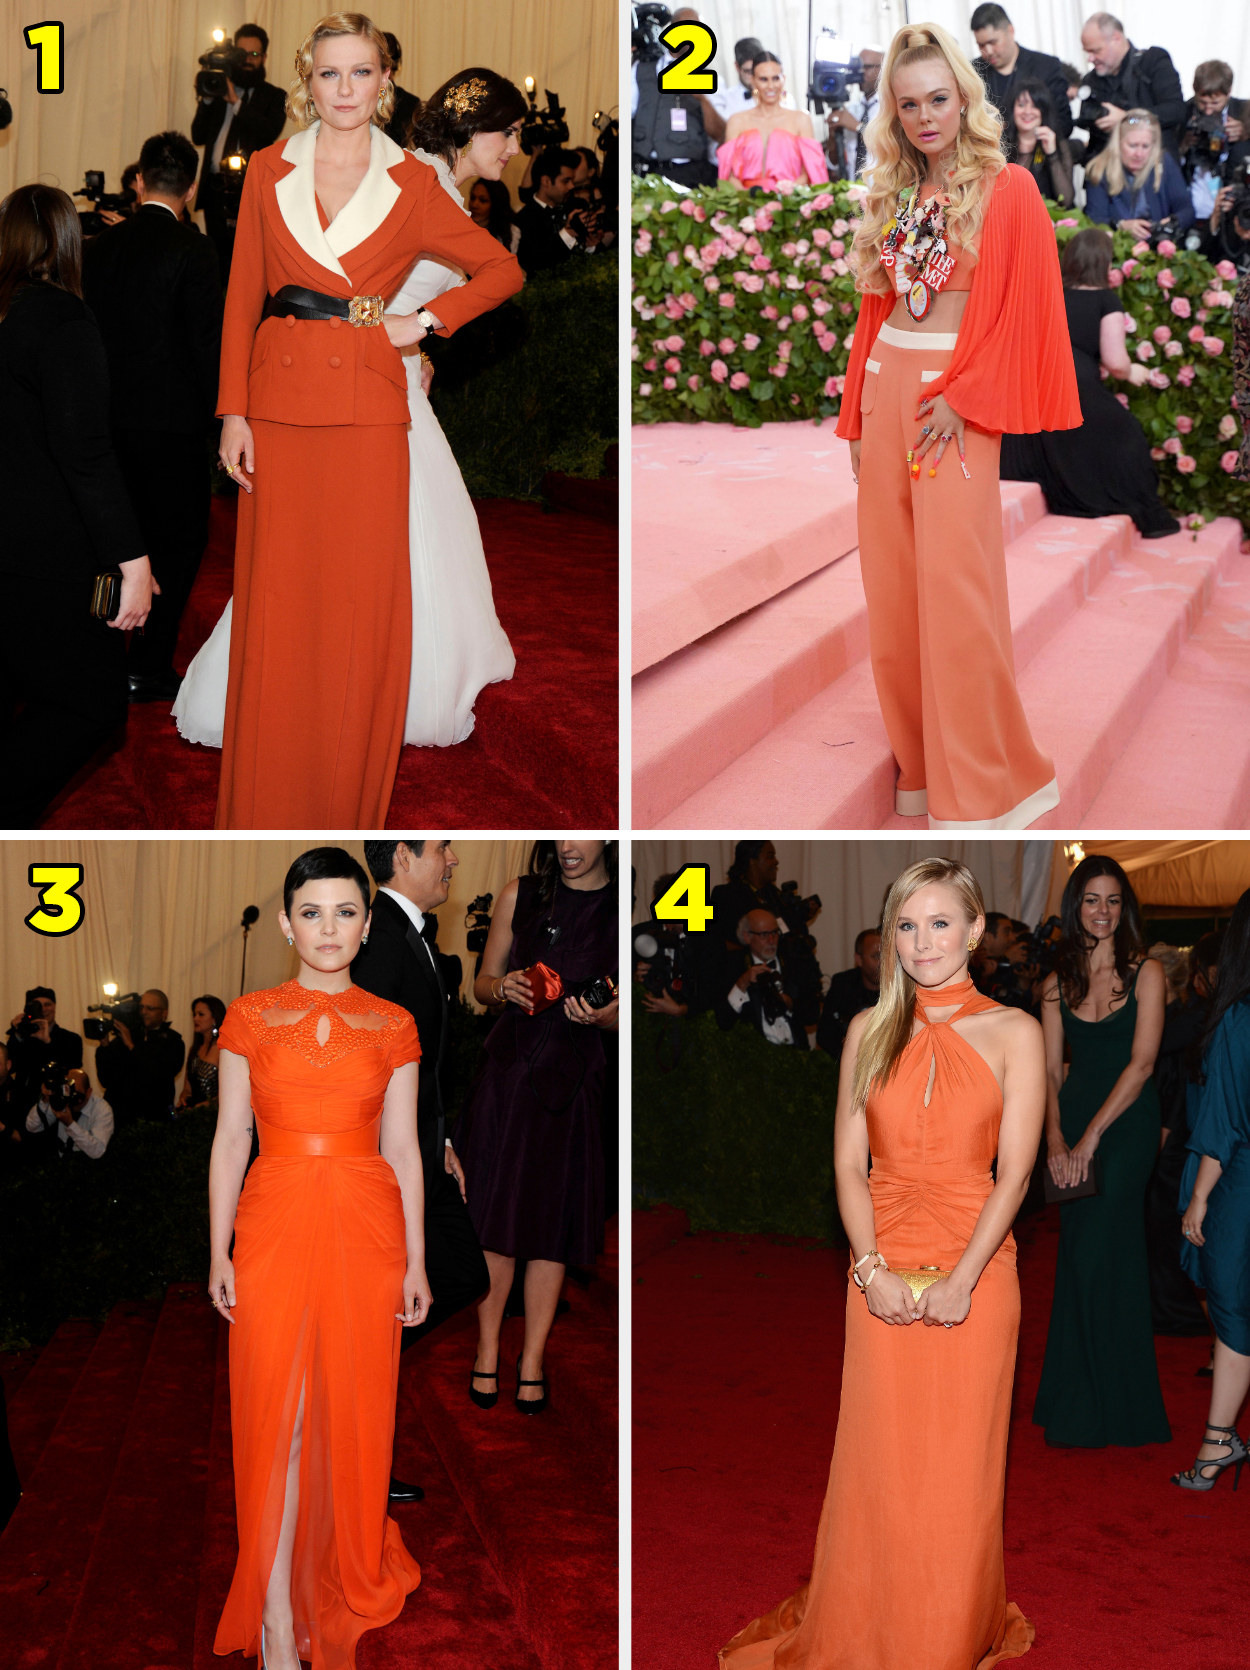 1. A blazer belted at the waist and a straight skirt. 2. a crop top with flowy bell sleeves and a funky necklace with appliques and matching pants. 3. A shortsleeved gown with a lace neckline. 4. a halter gown with a key hole on the chest.